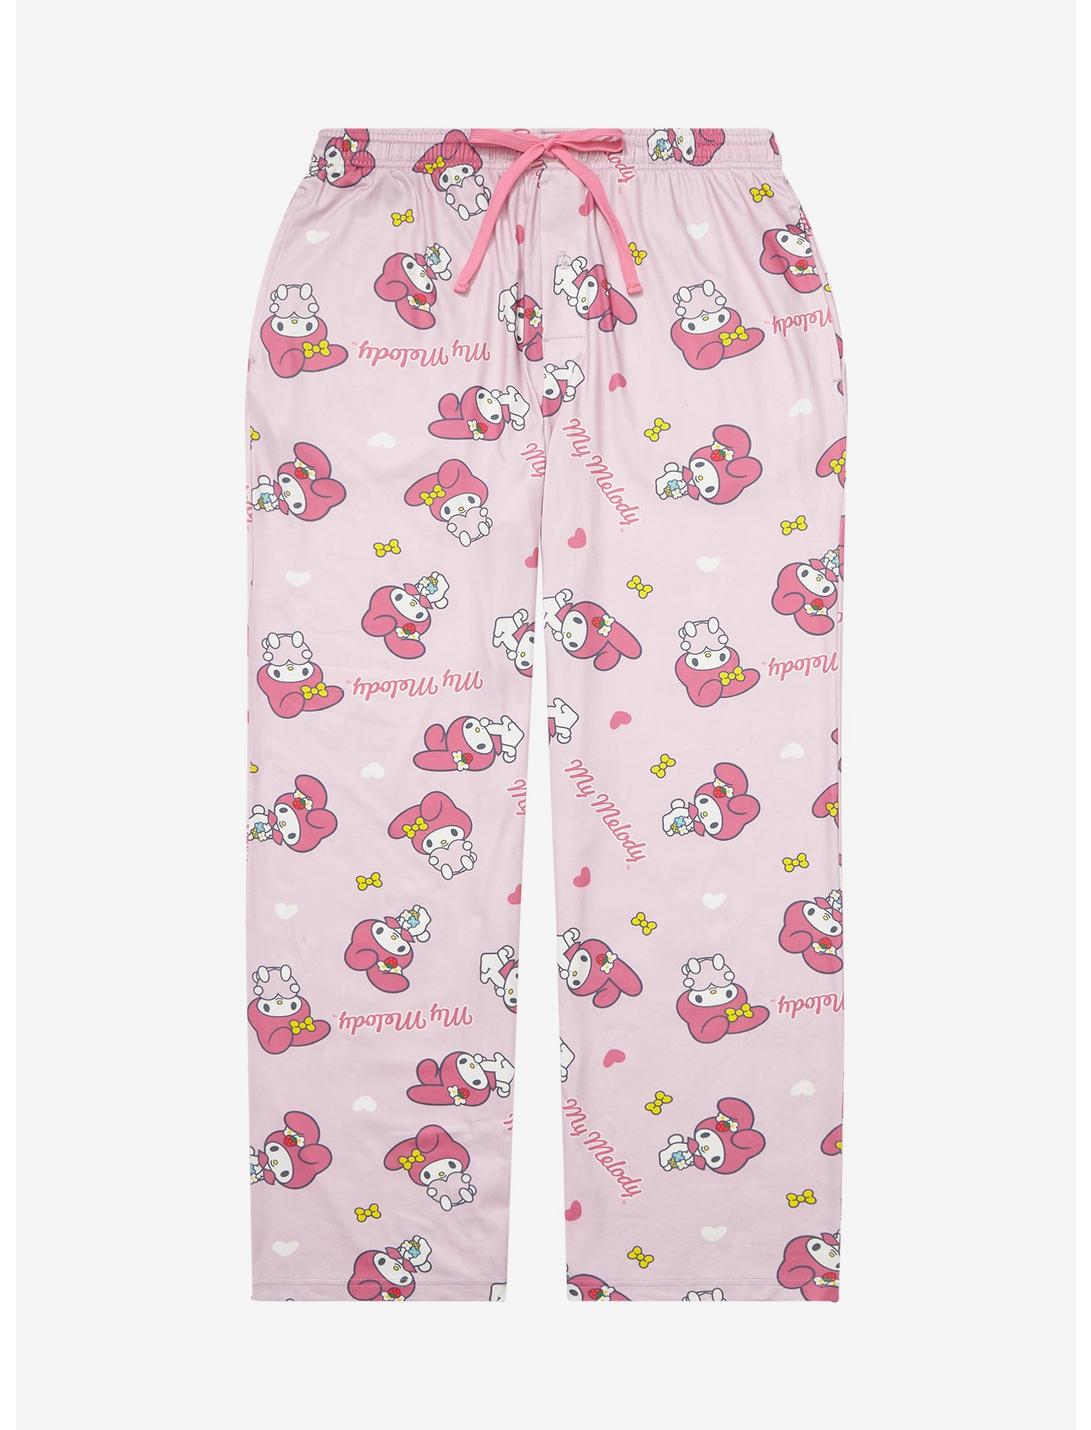 Sanrio My Melody Allover Print Women's Plus Size Sleep Pants - BoxLunch Exclusive, LIGHT PINK, hi-res